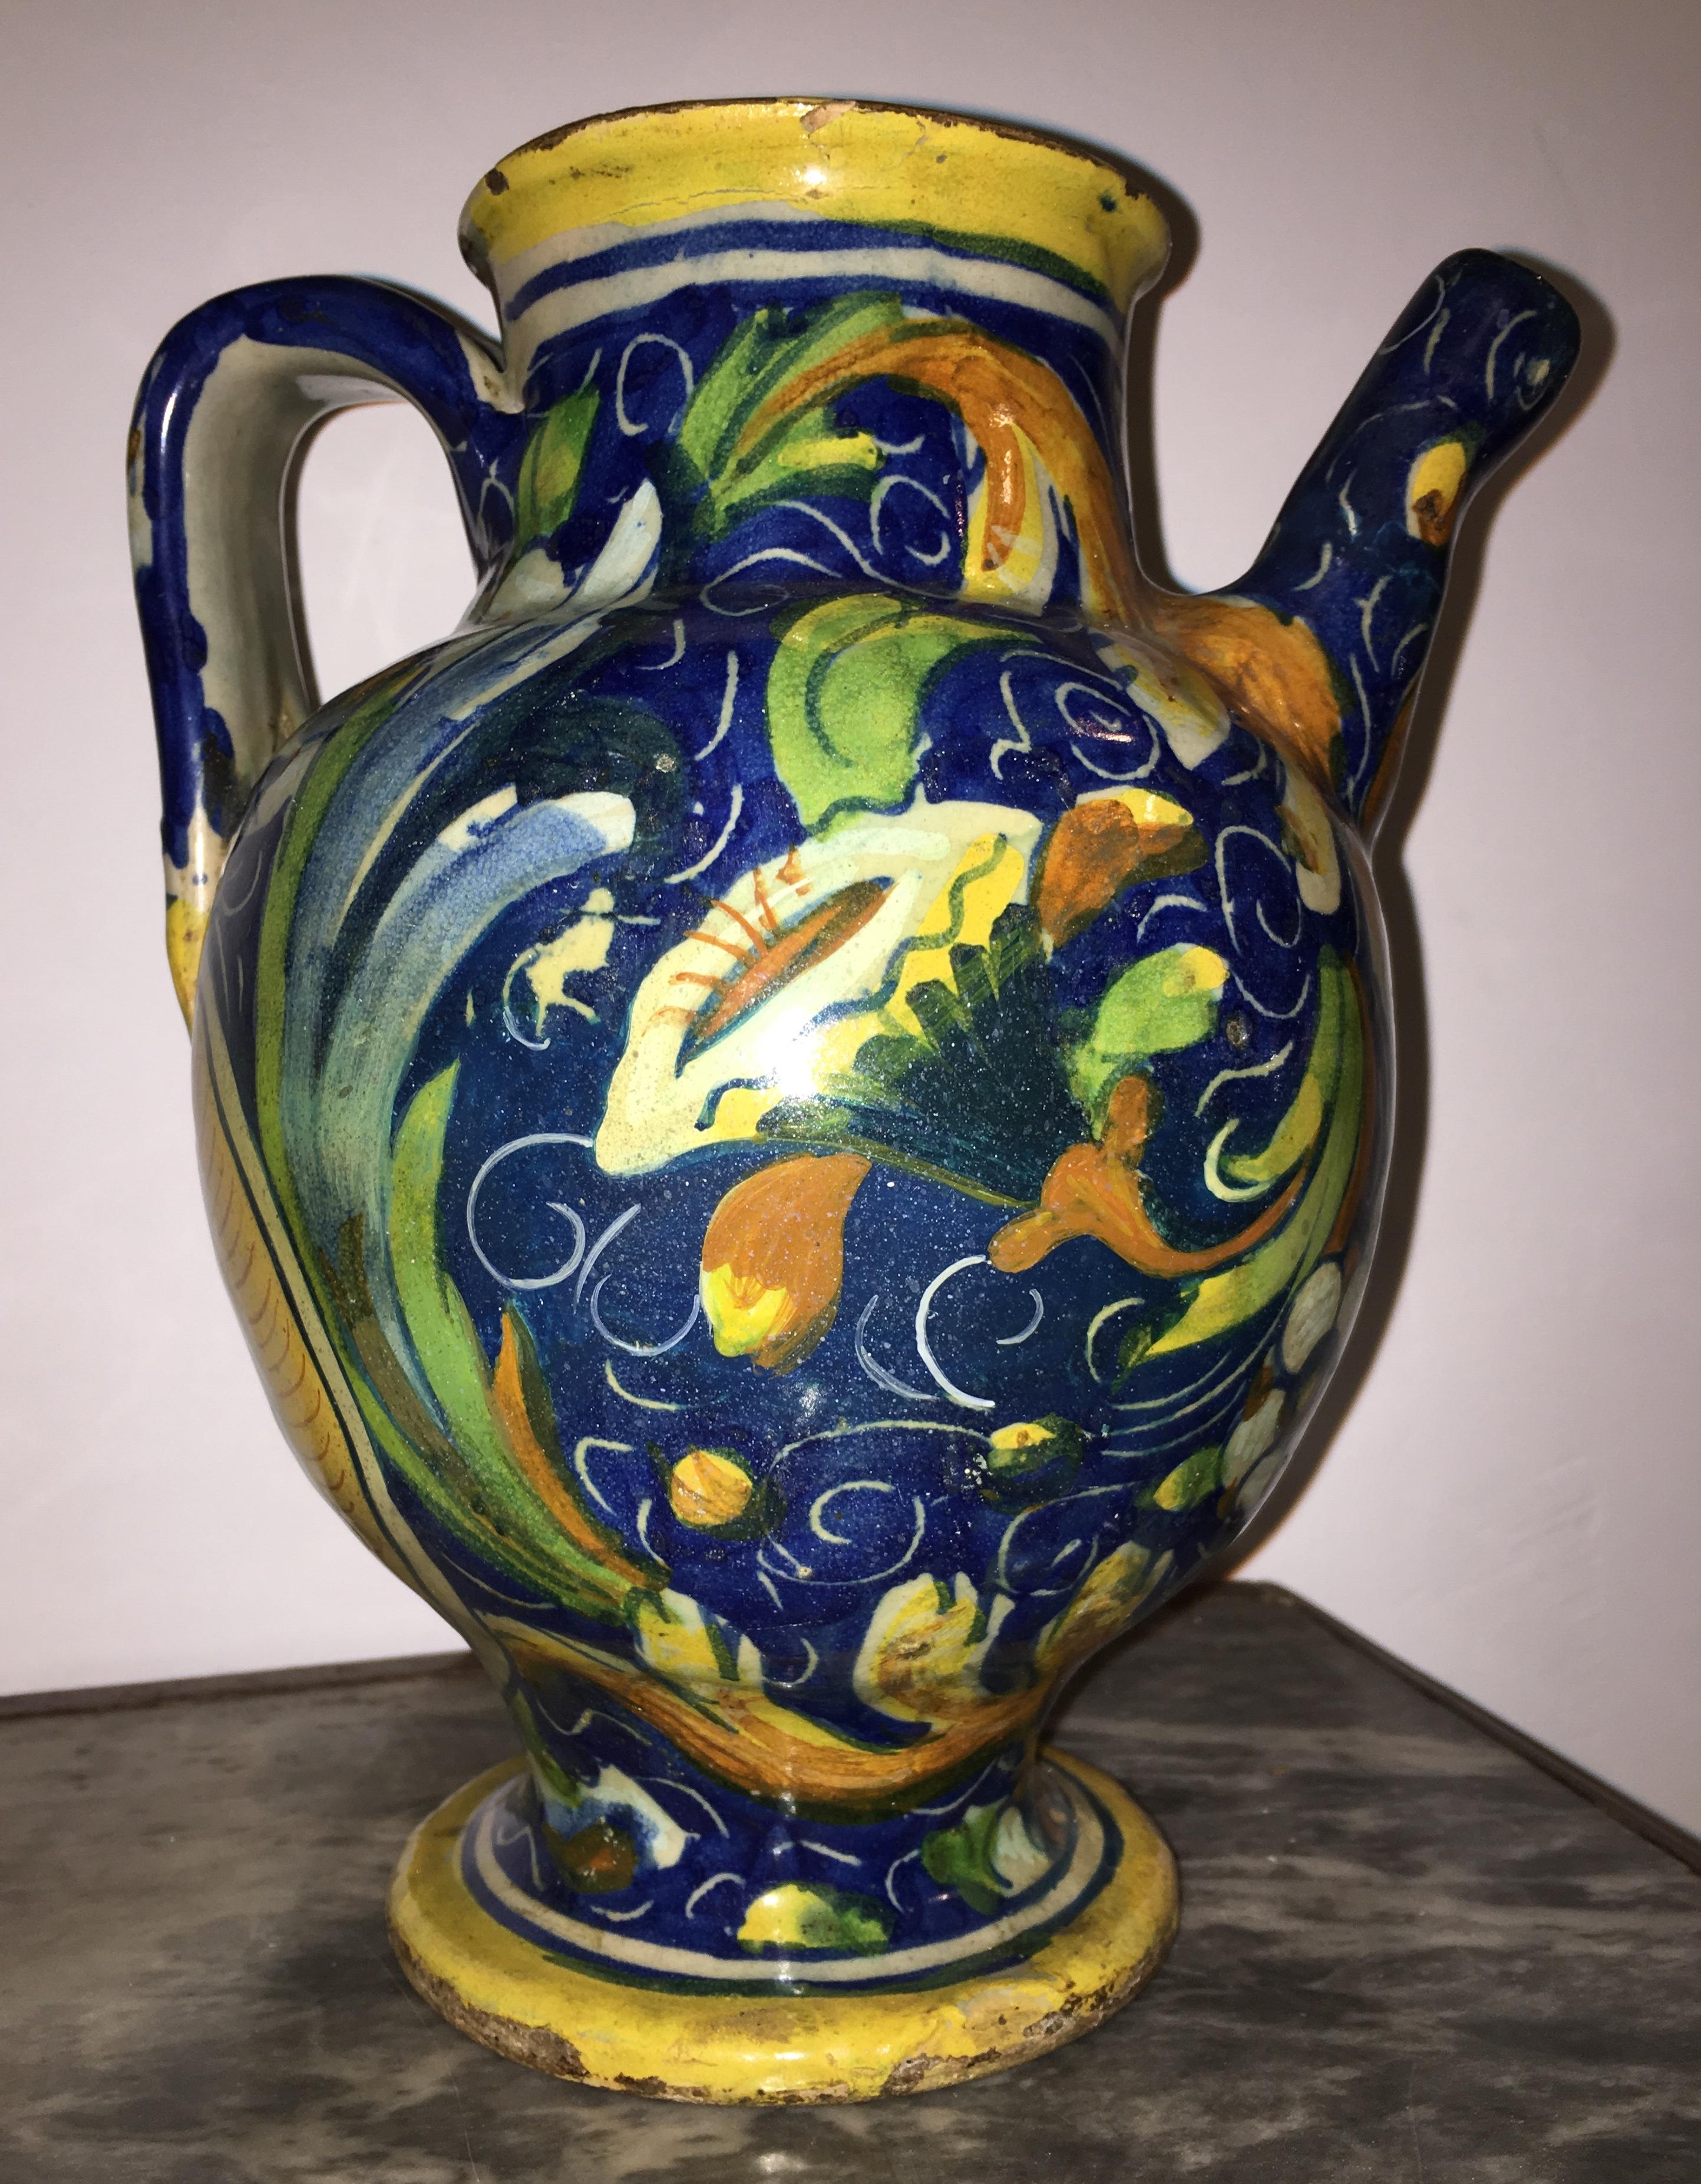 18th century Venezia Maiolica jug within the medallion placed in the back of the jug with the figure of a saint. All around there is the decoration of flowers, fruit trees and leafy branches, as well as curls made from scratch on the blue background.